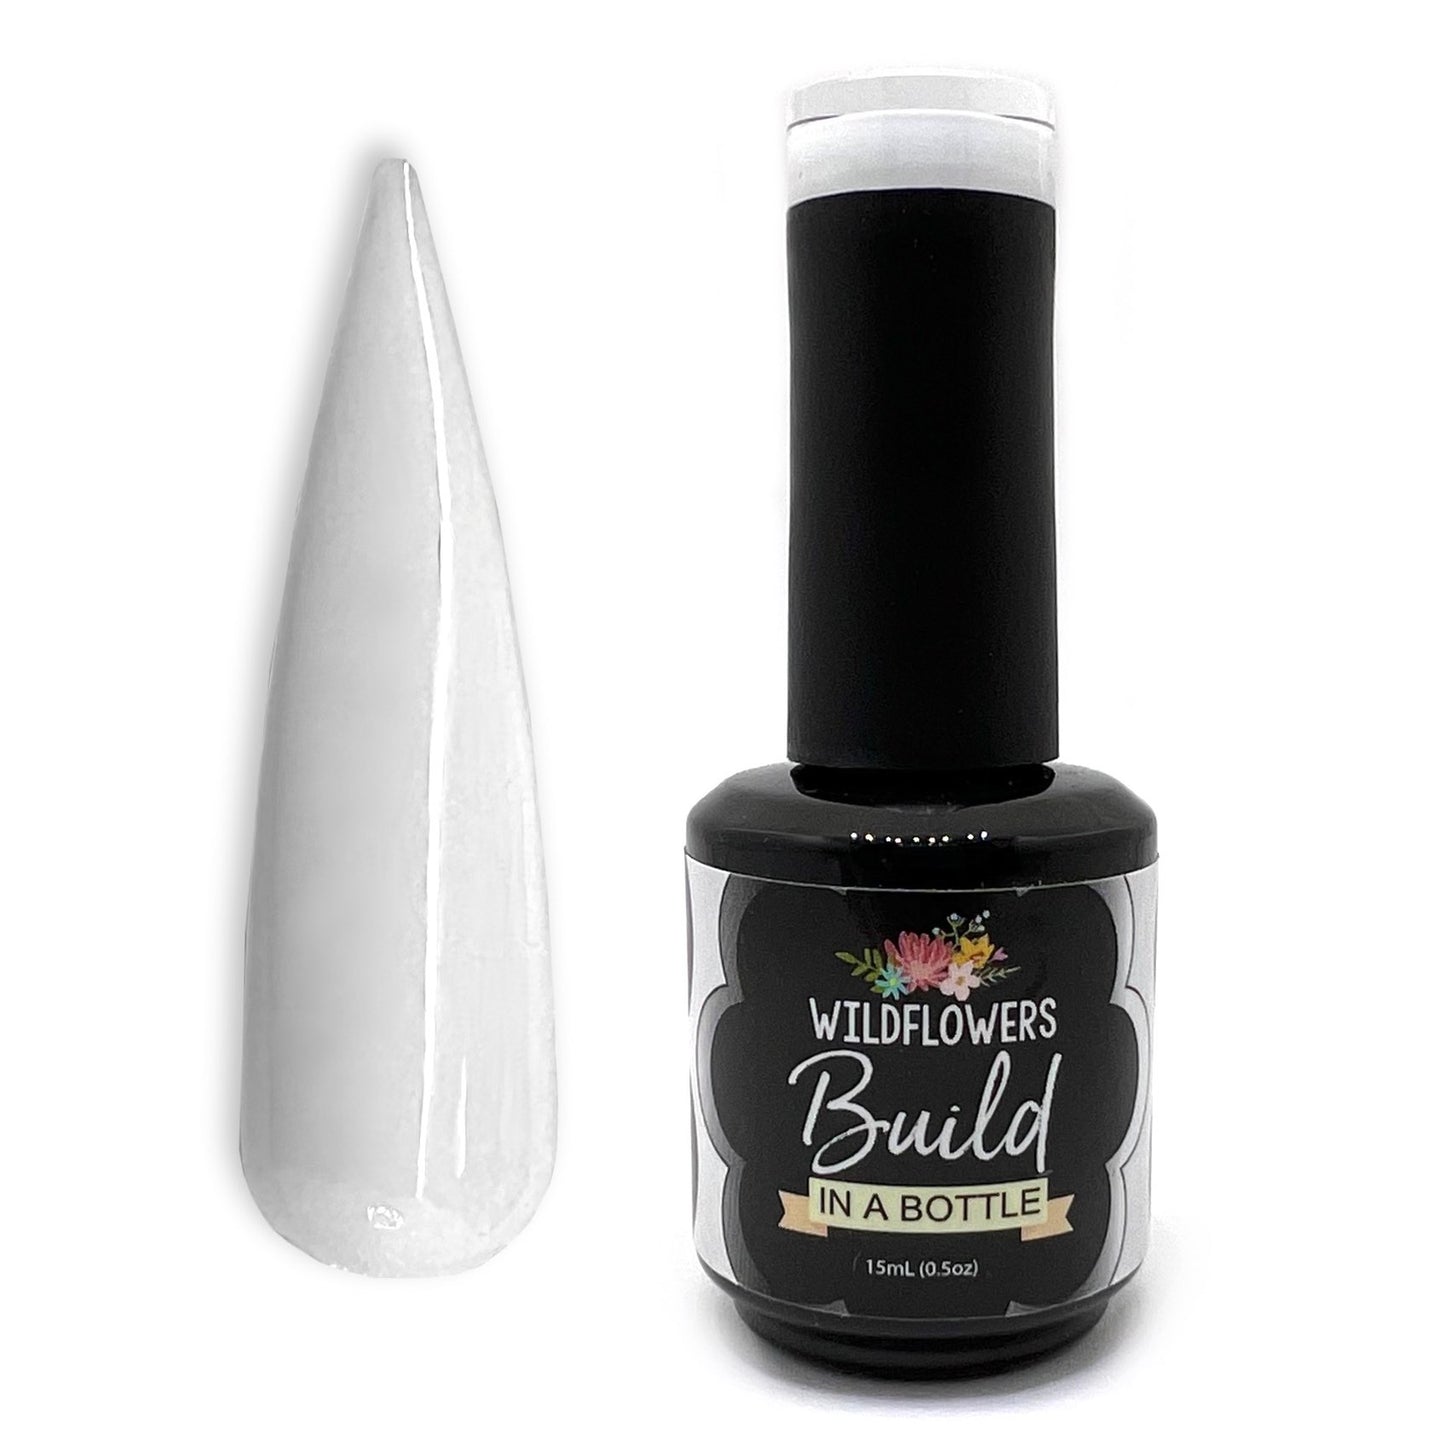 Build in a Bottle - White